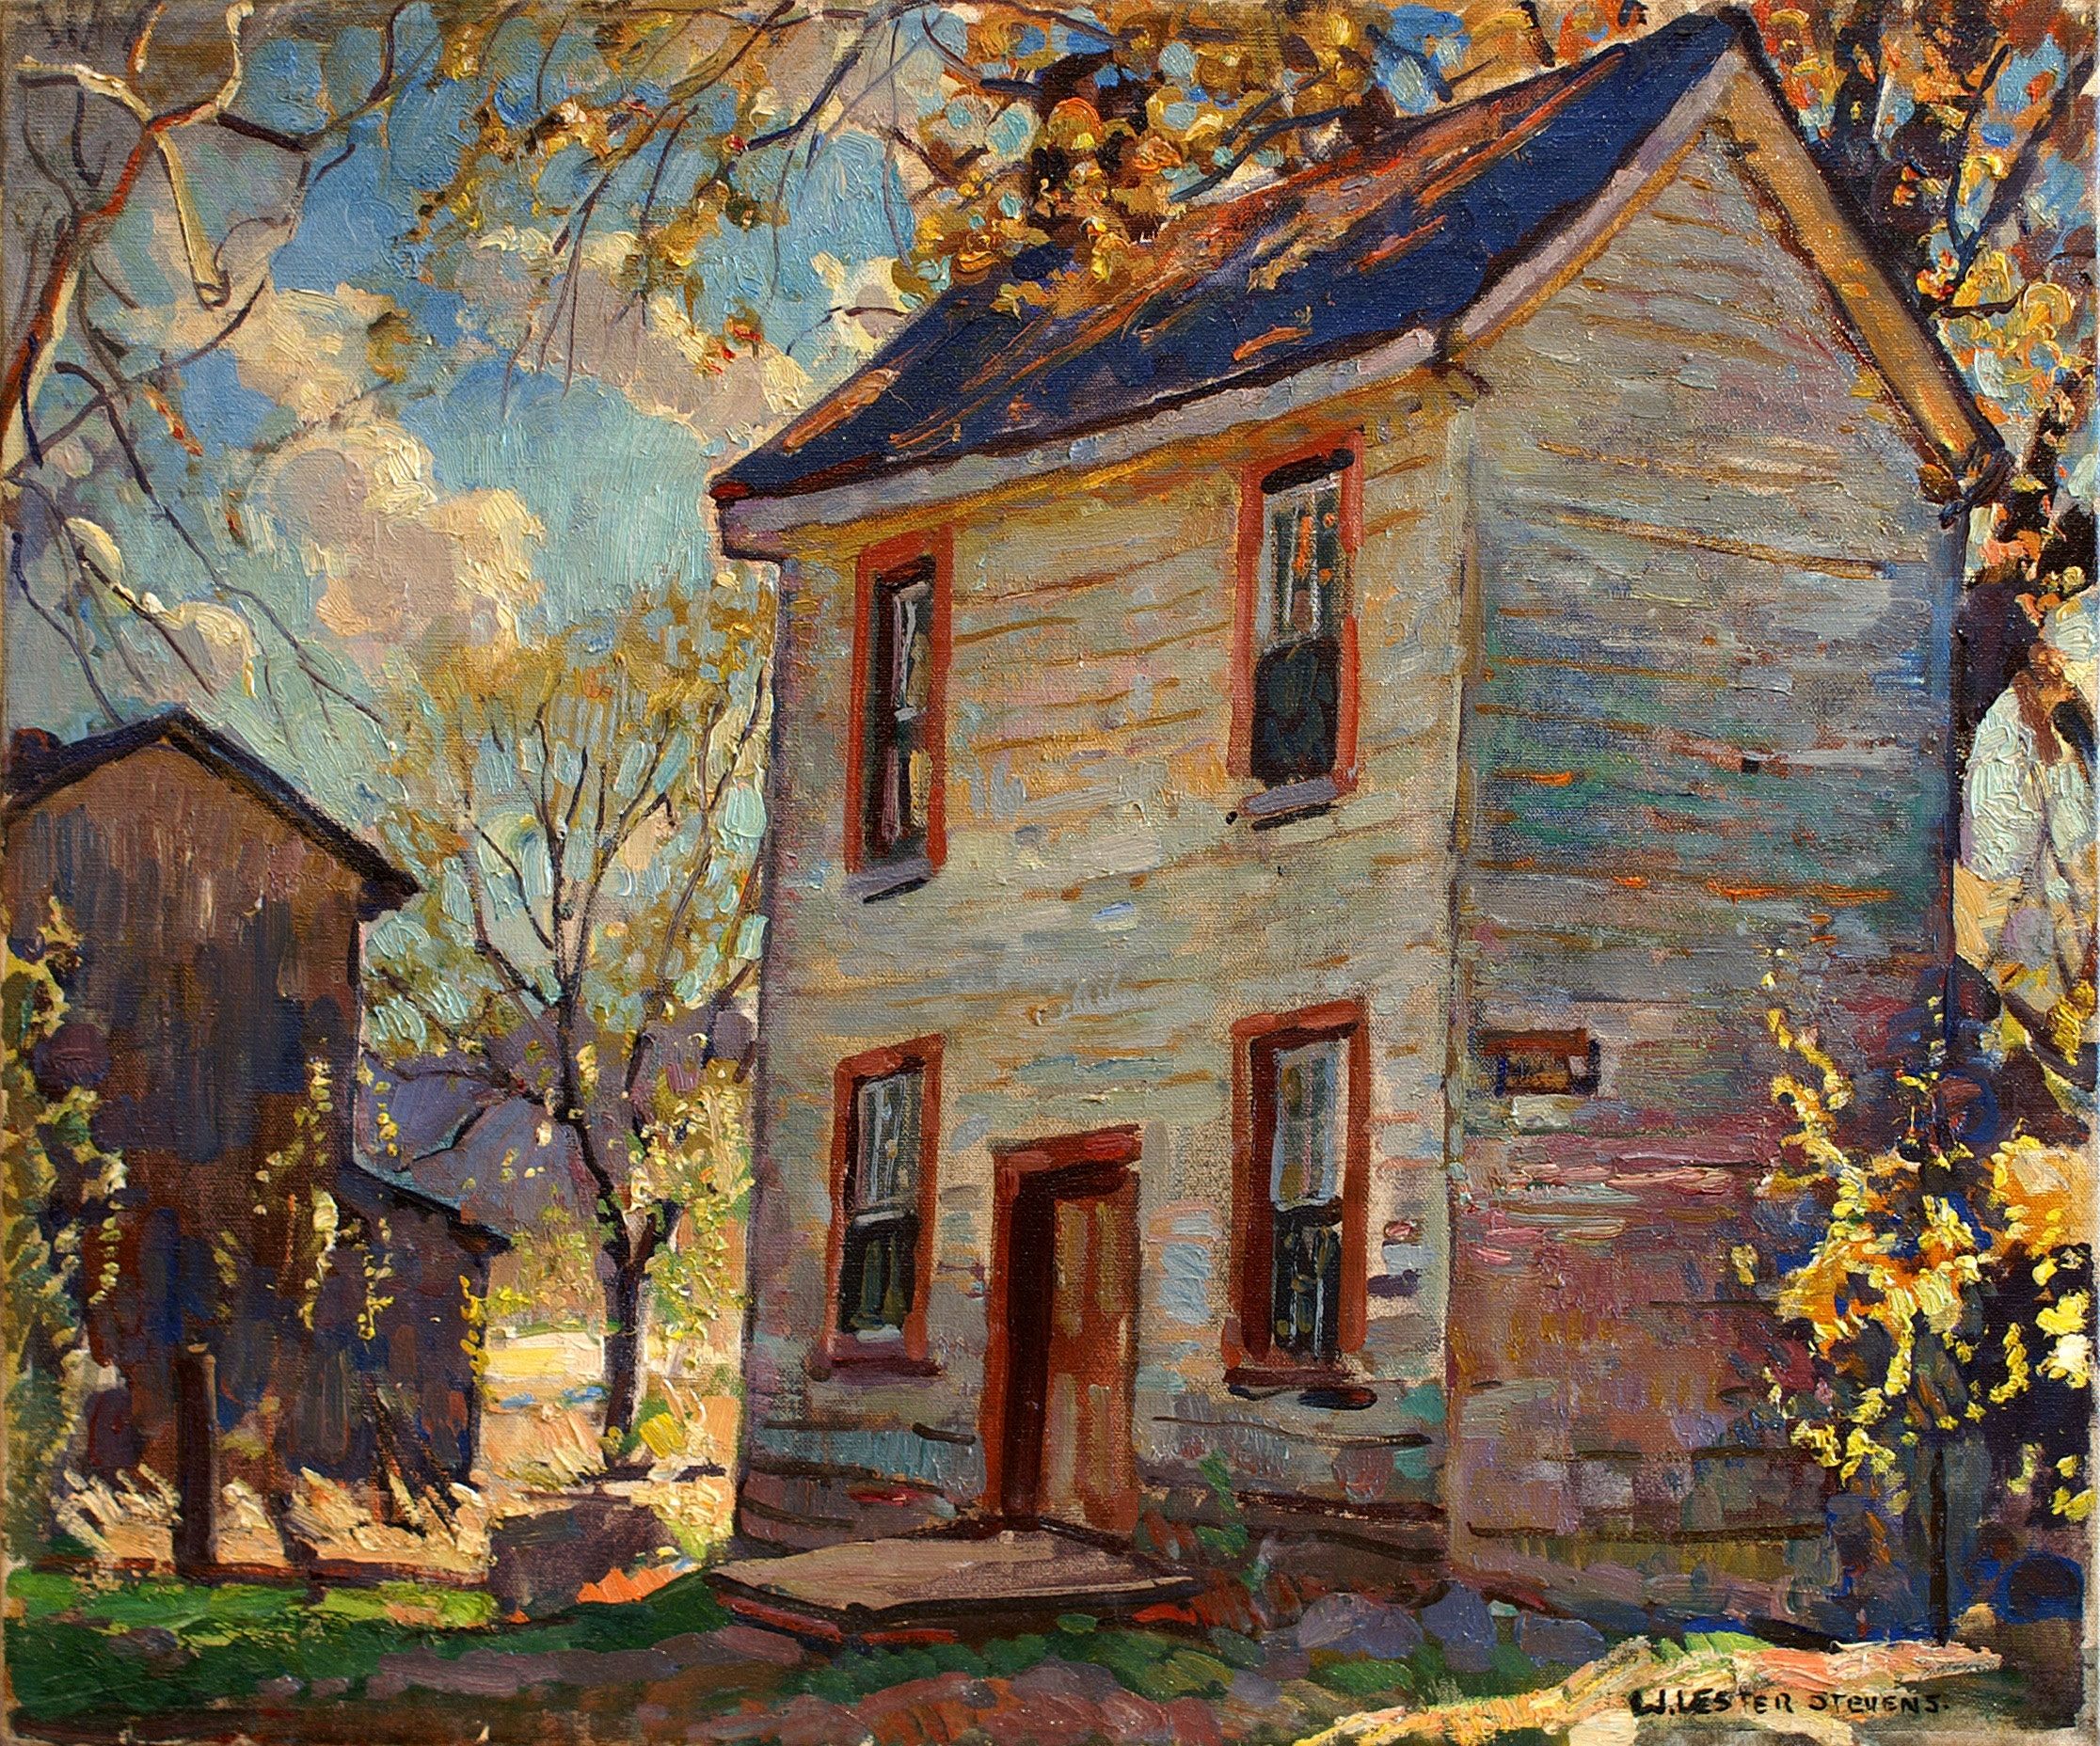 paintings trees buildings cottage 2232x1856 wallpaper High Quality Wallpaper, High Definition Wallpaper